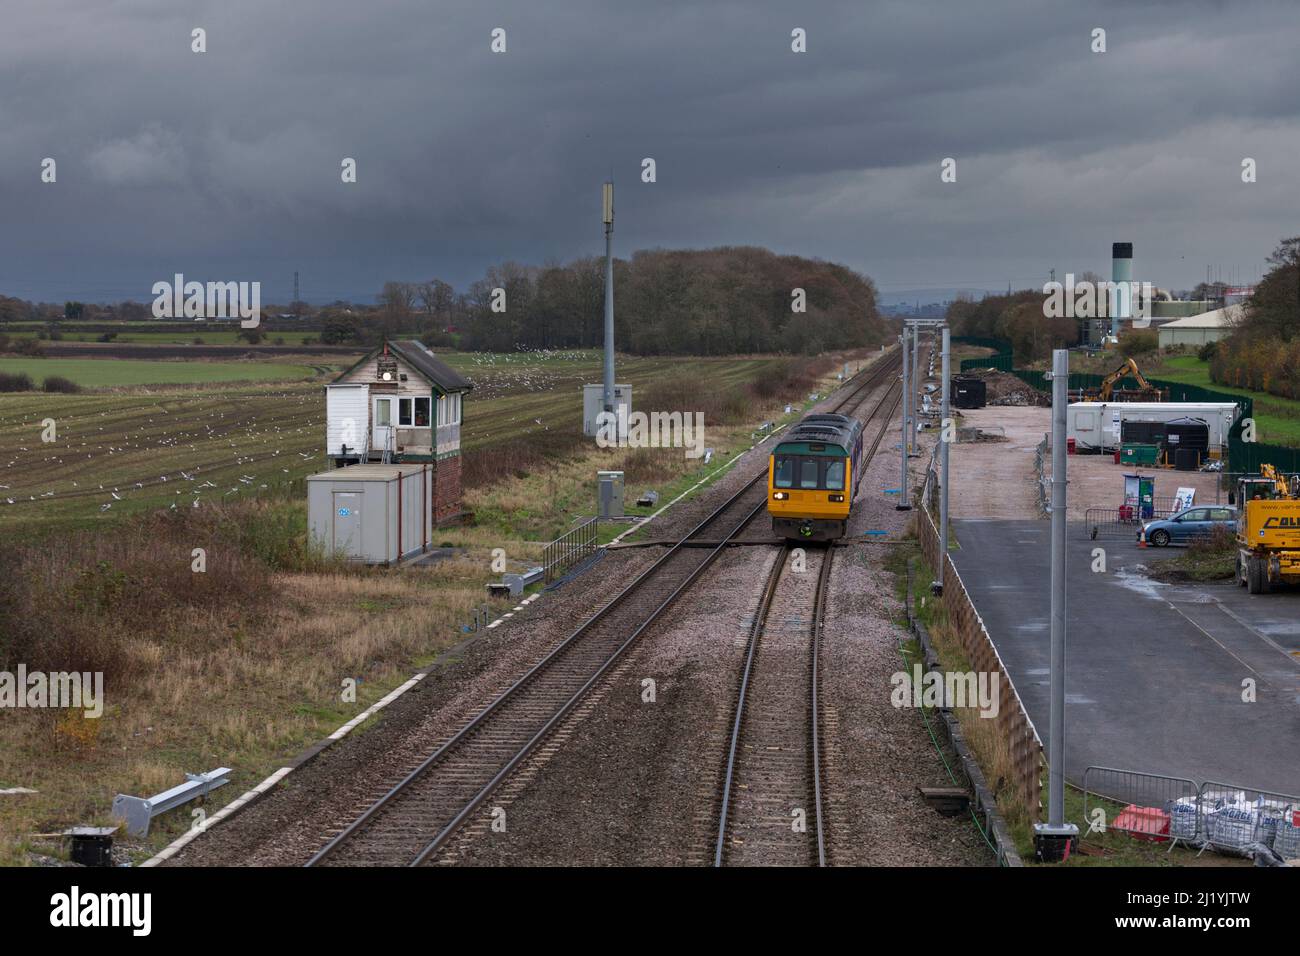 Northern Rail class 142 pacer trains passing the Lancashire and Yorkshire railway mechanical signal box at Salwick on the day it closed. Stock Photo